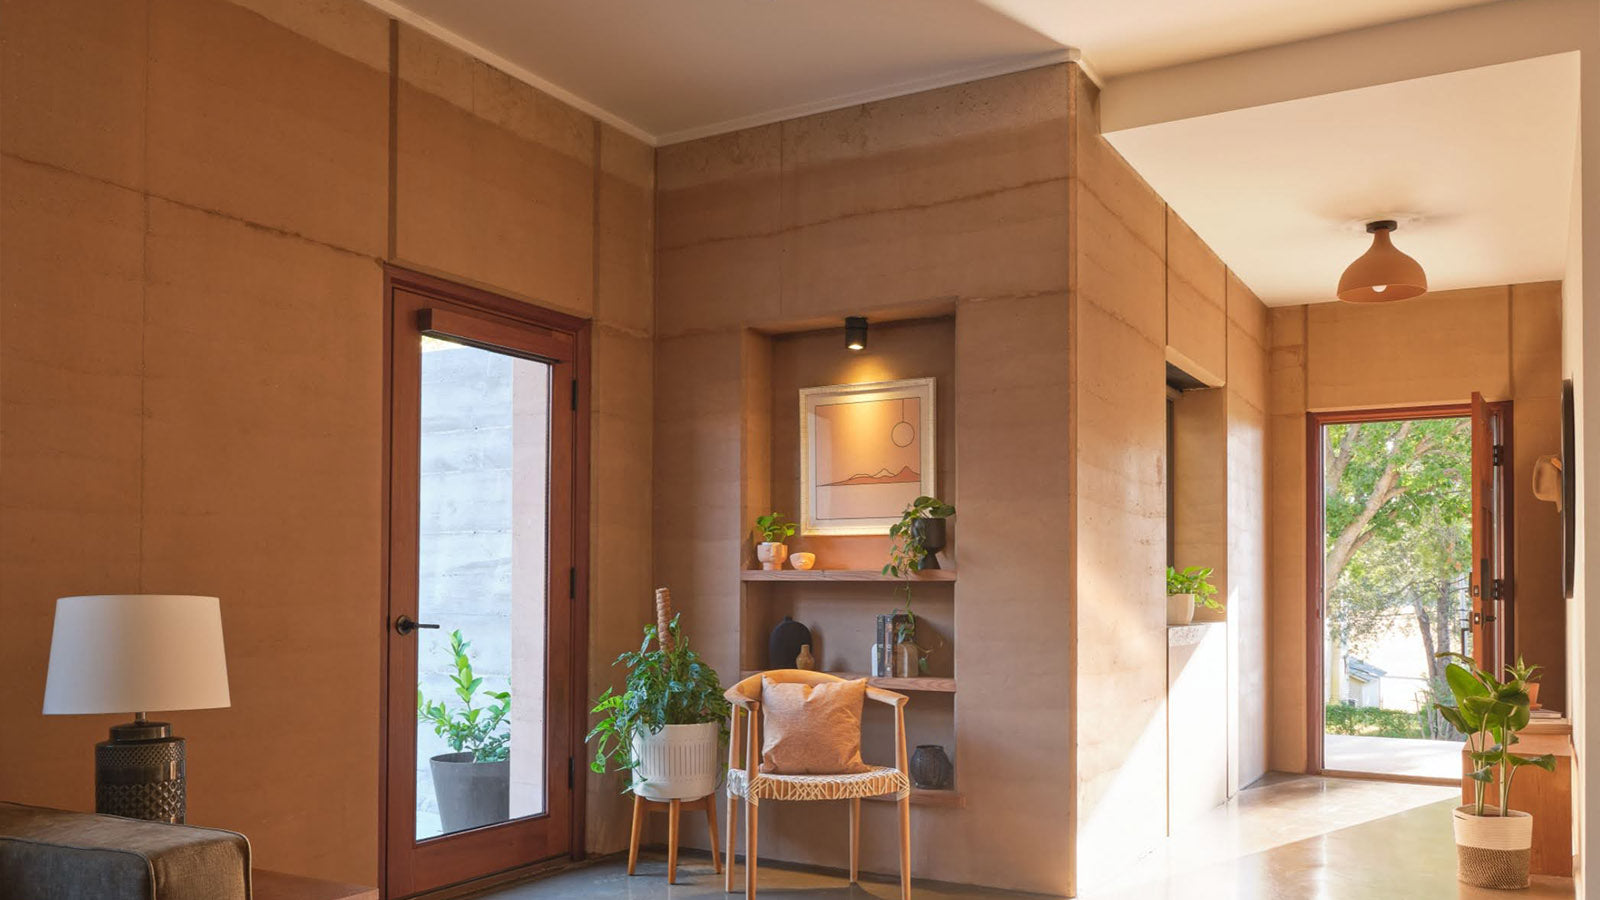 Interior walls of rammed earth structure